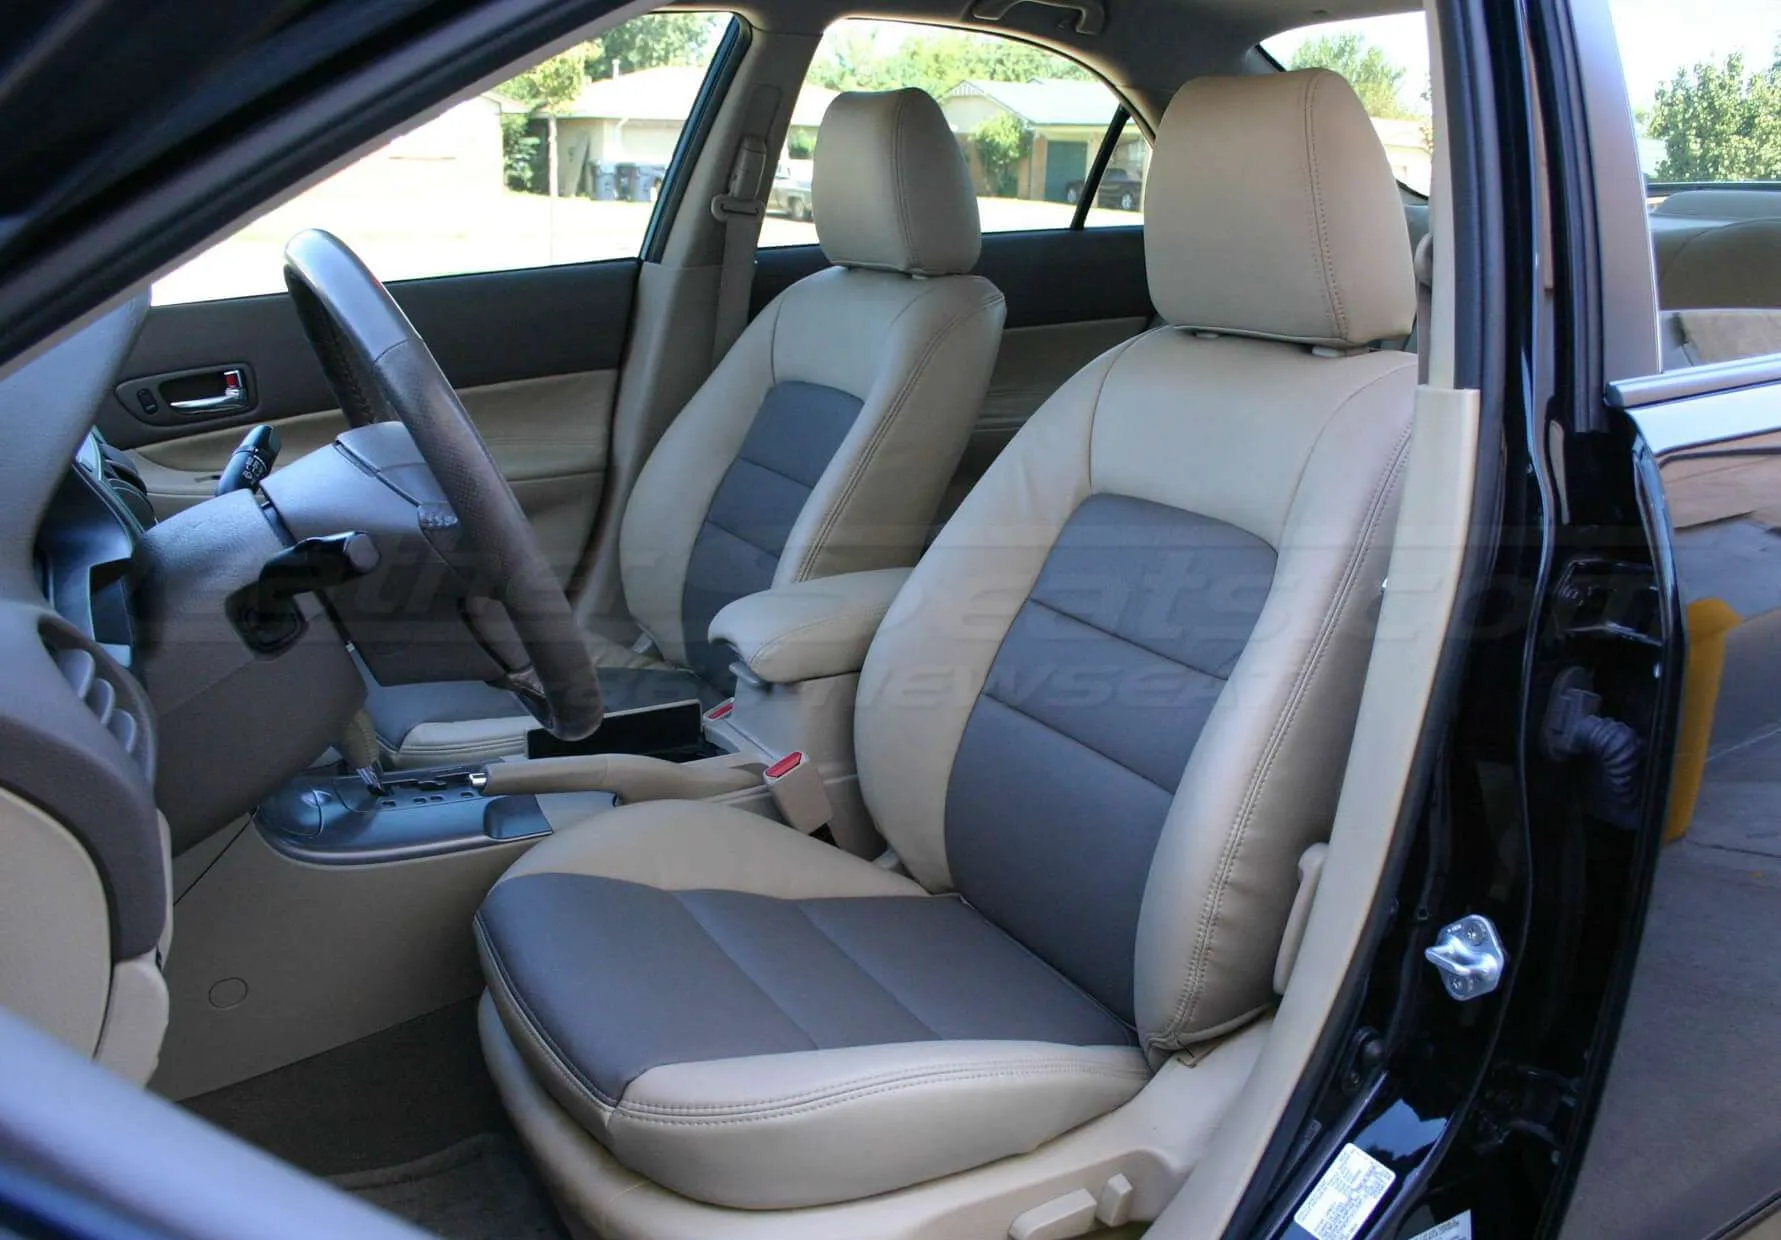 Mazda 6 Leather Seats - Front interior